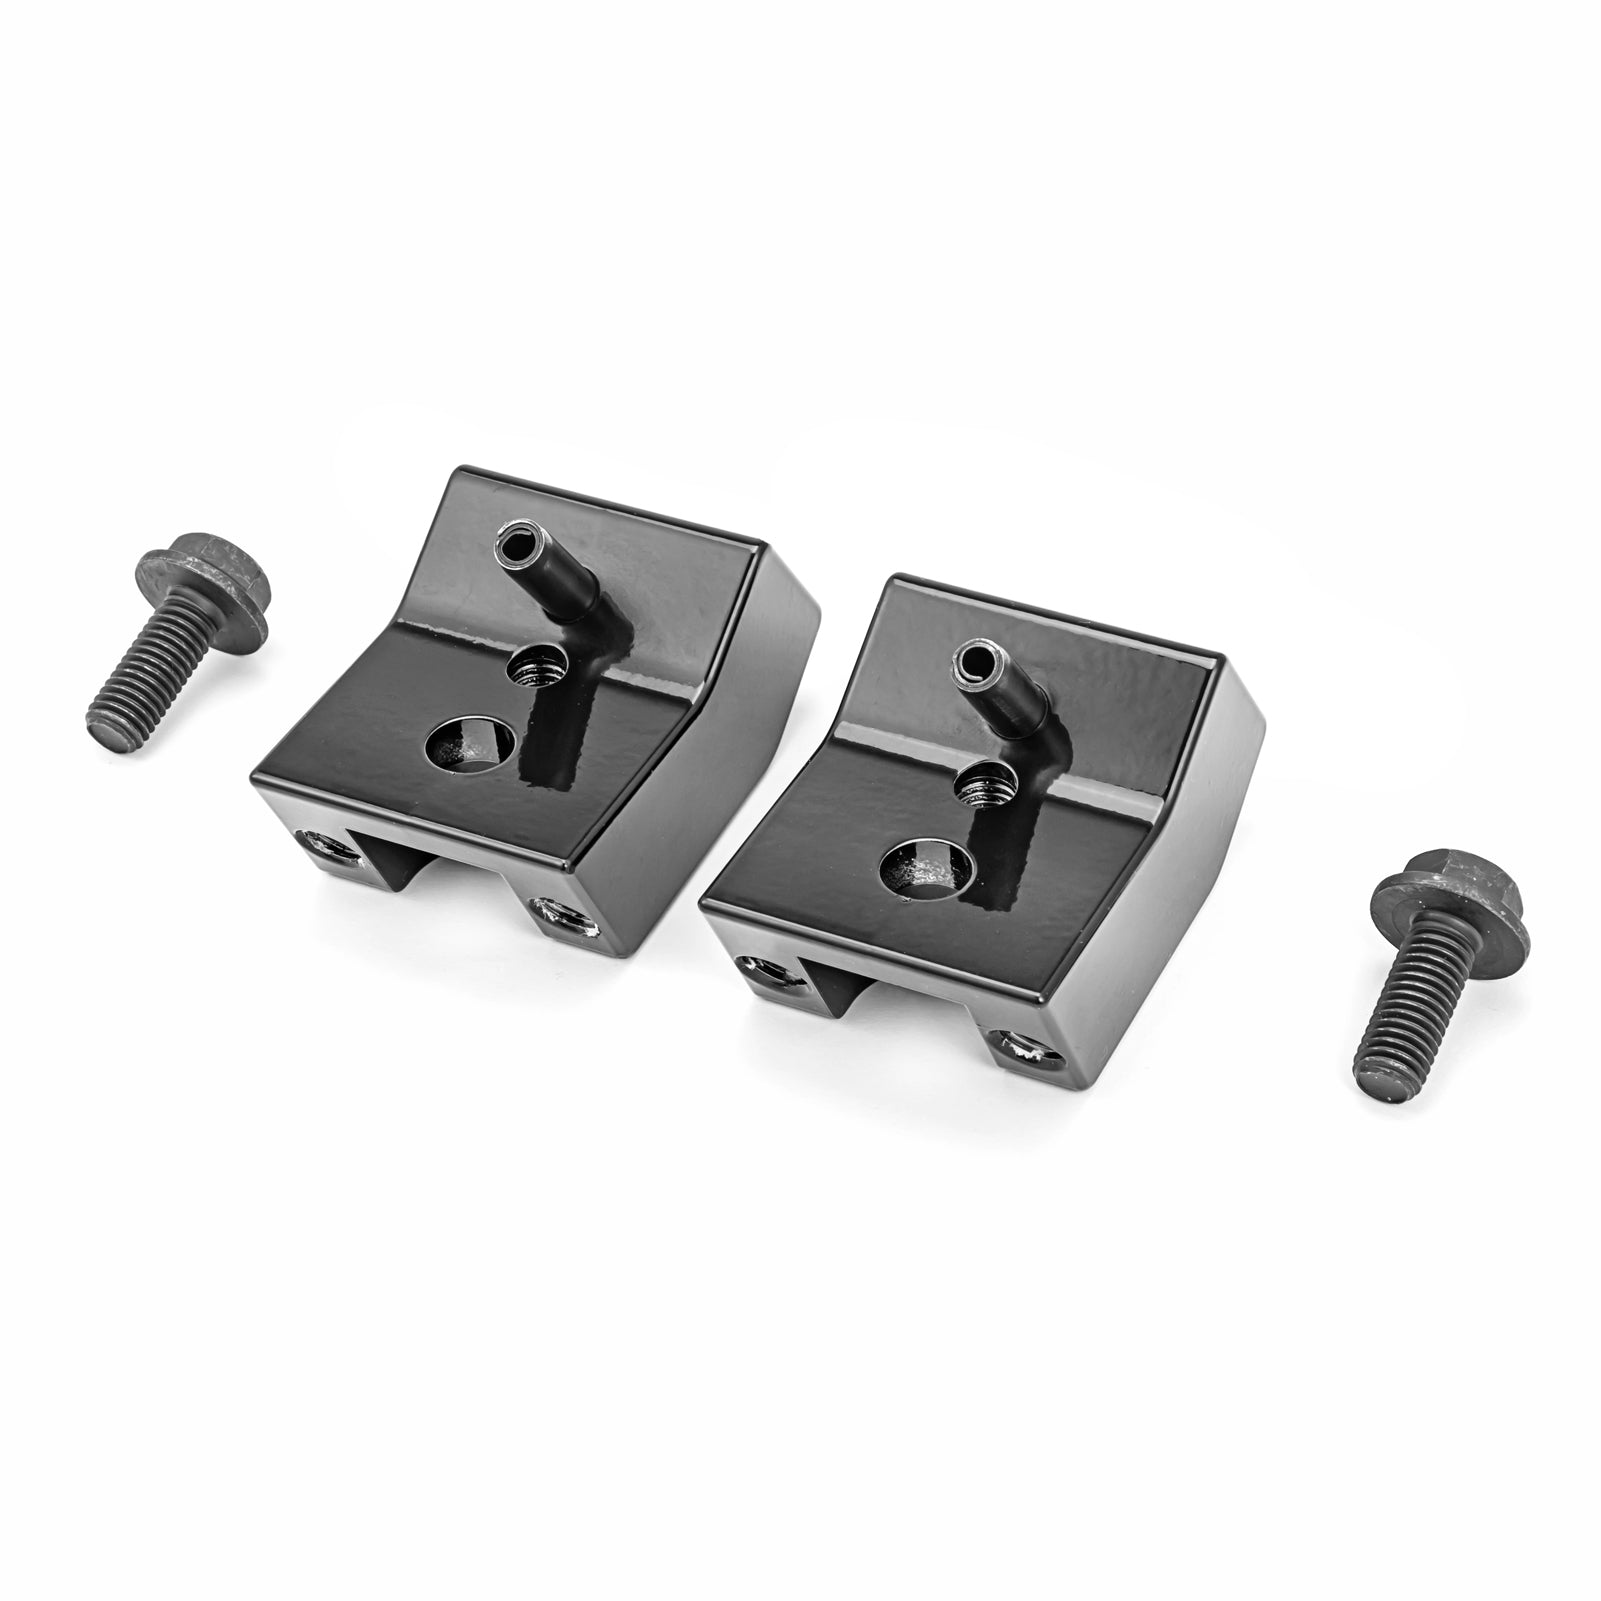 Weisen - CNC Front & Rear Seat Riser Spacer Lift Kit Fit 2005-2022 Toyota Tacoma Tundra 4Runner FJ Cruiser Captain's Chairs, Black